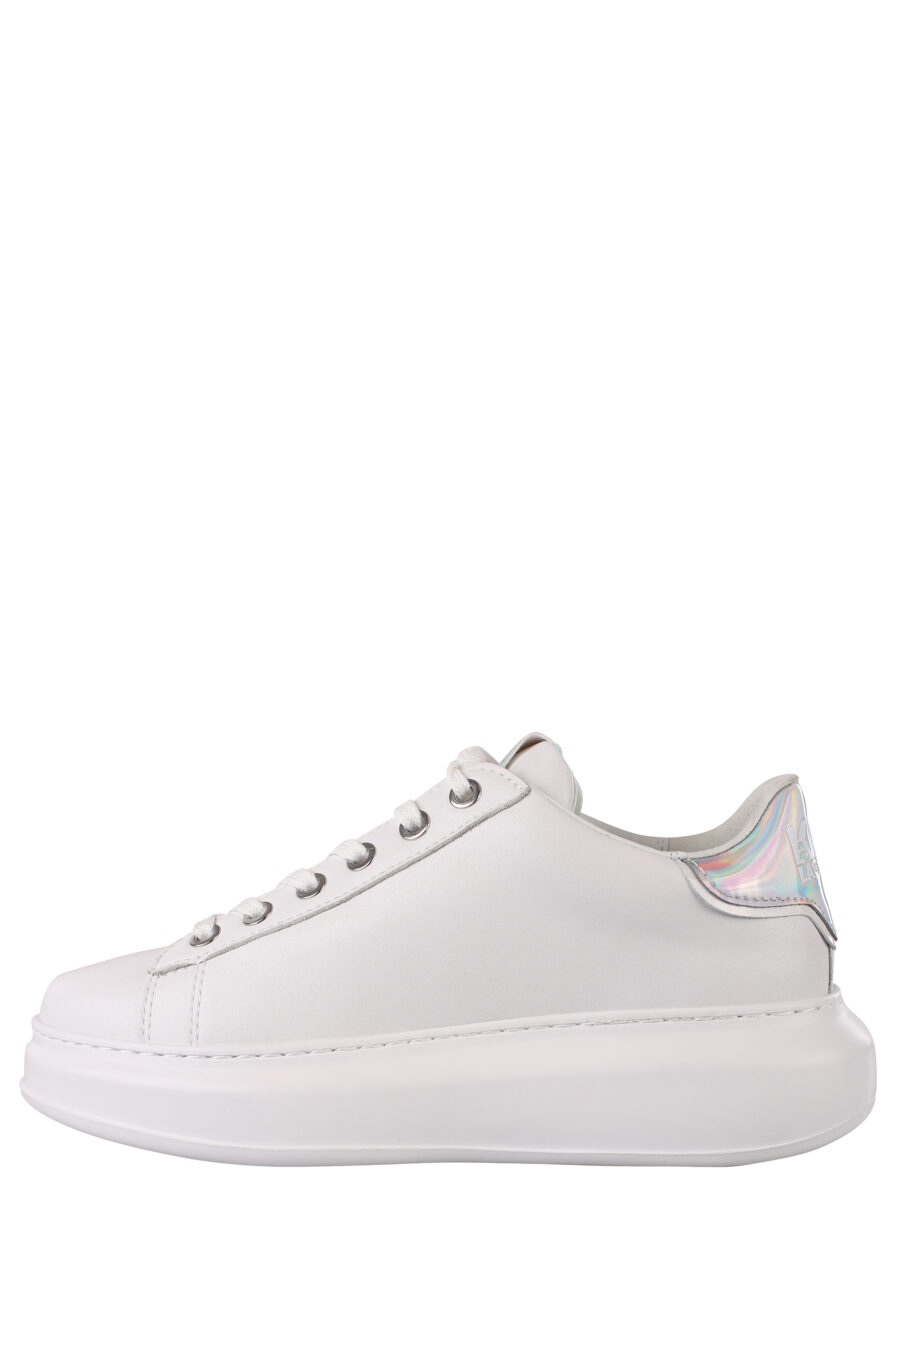 White trainers with white logo and iridescent detail - IMG 1362